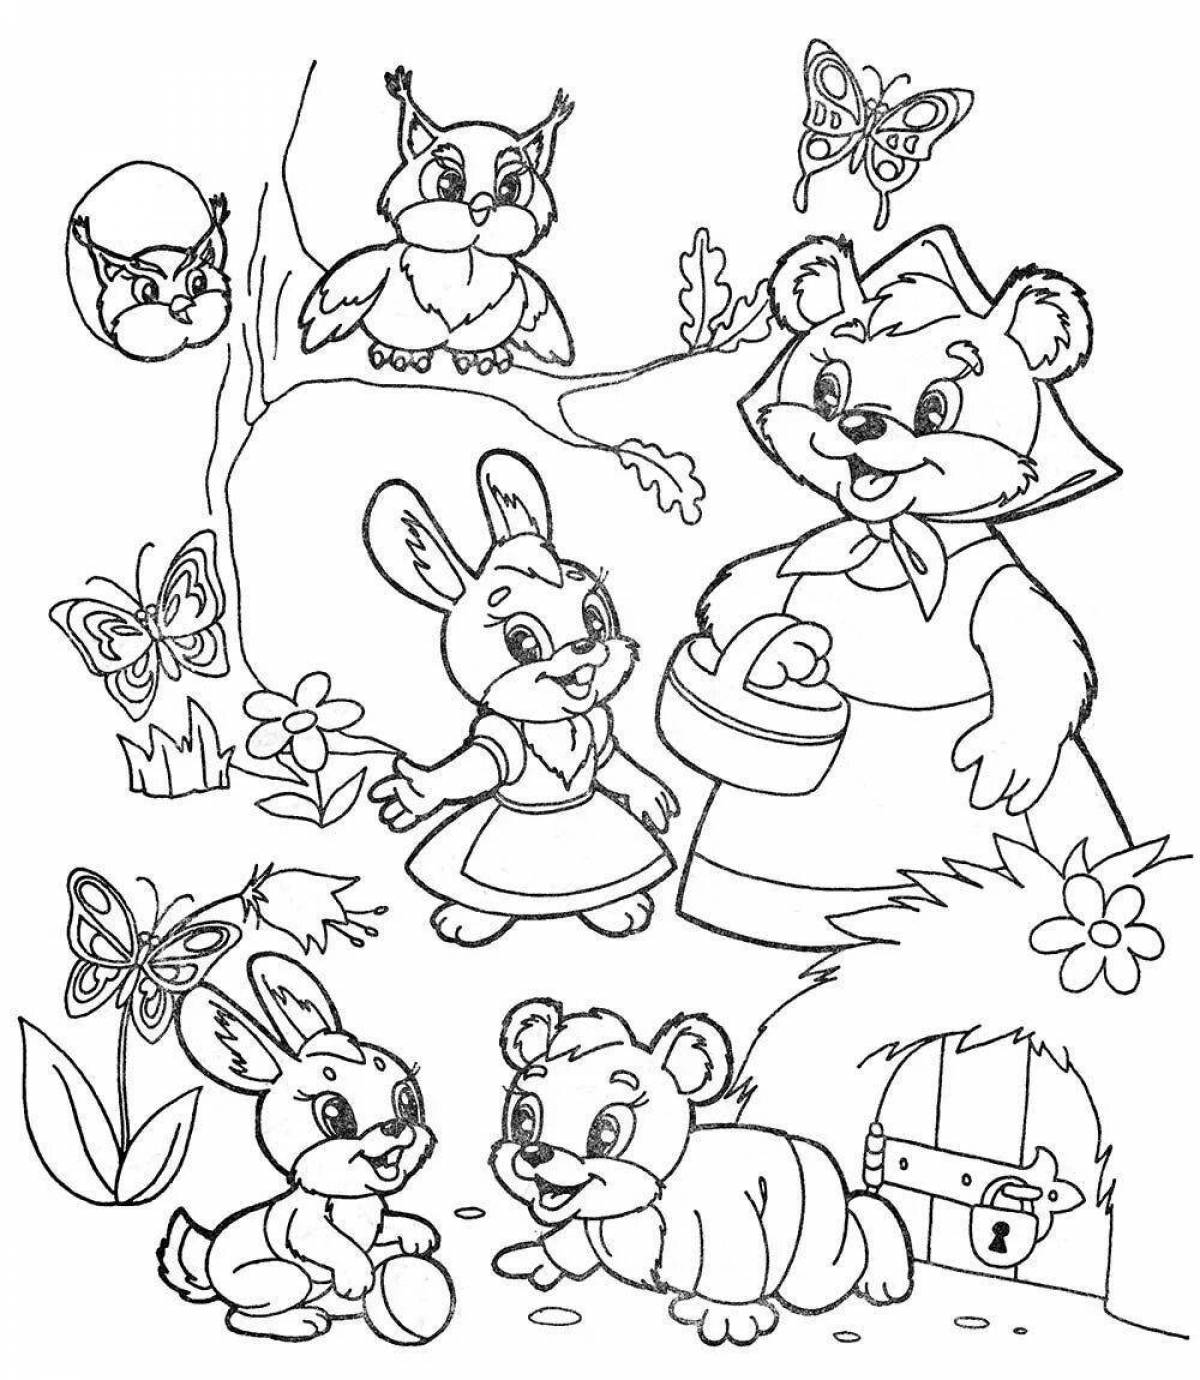 Joyful forest animal coloring page